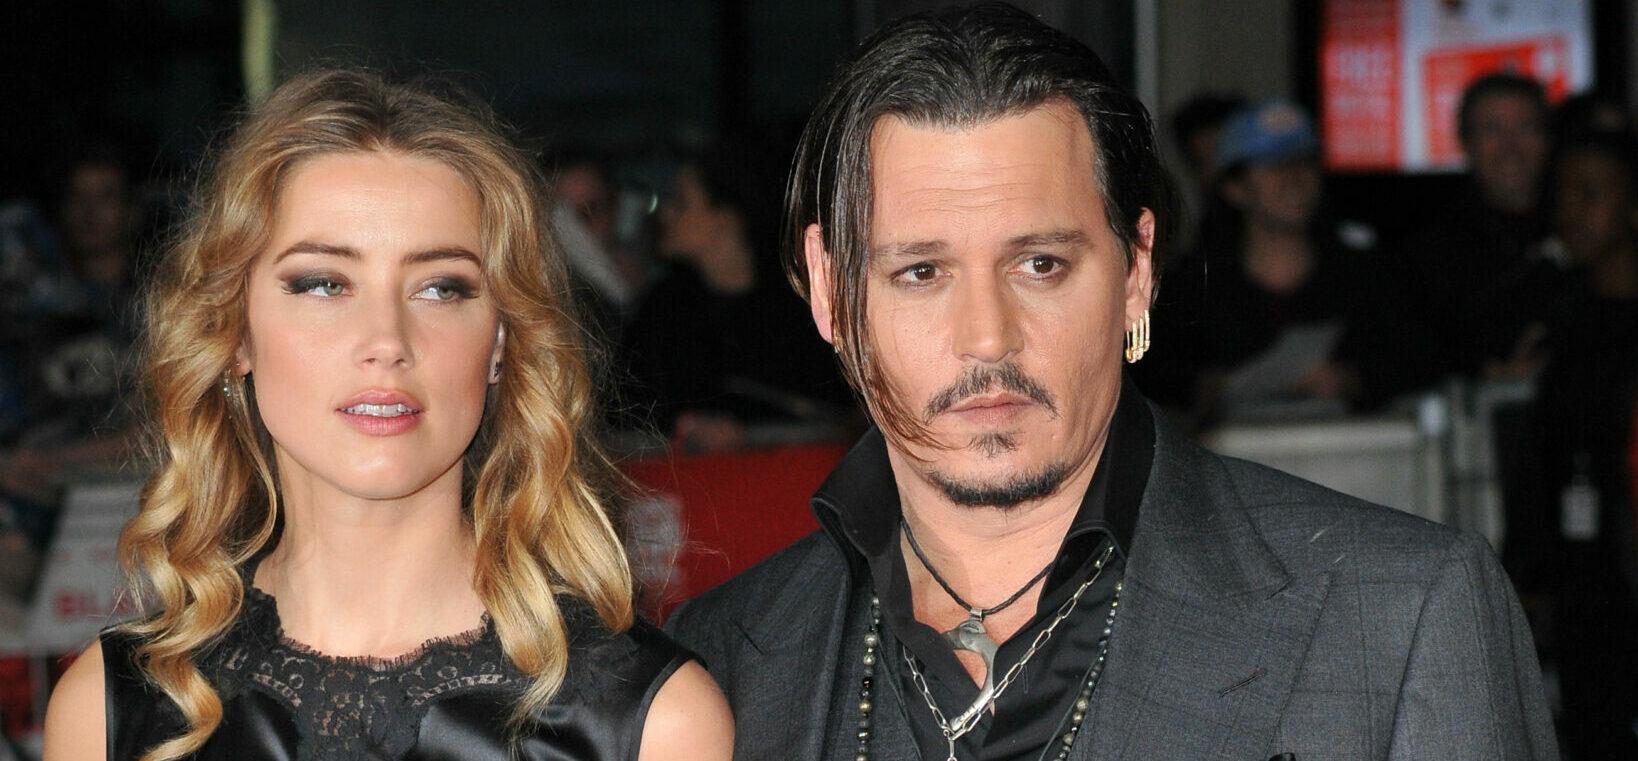 Johnny Depp Set To Share $1 Million Settlement Paid By Amber Heard Among His Favorite Charities